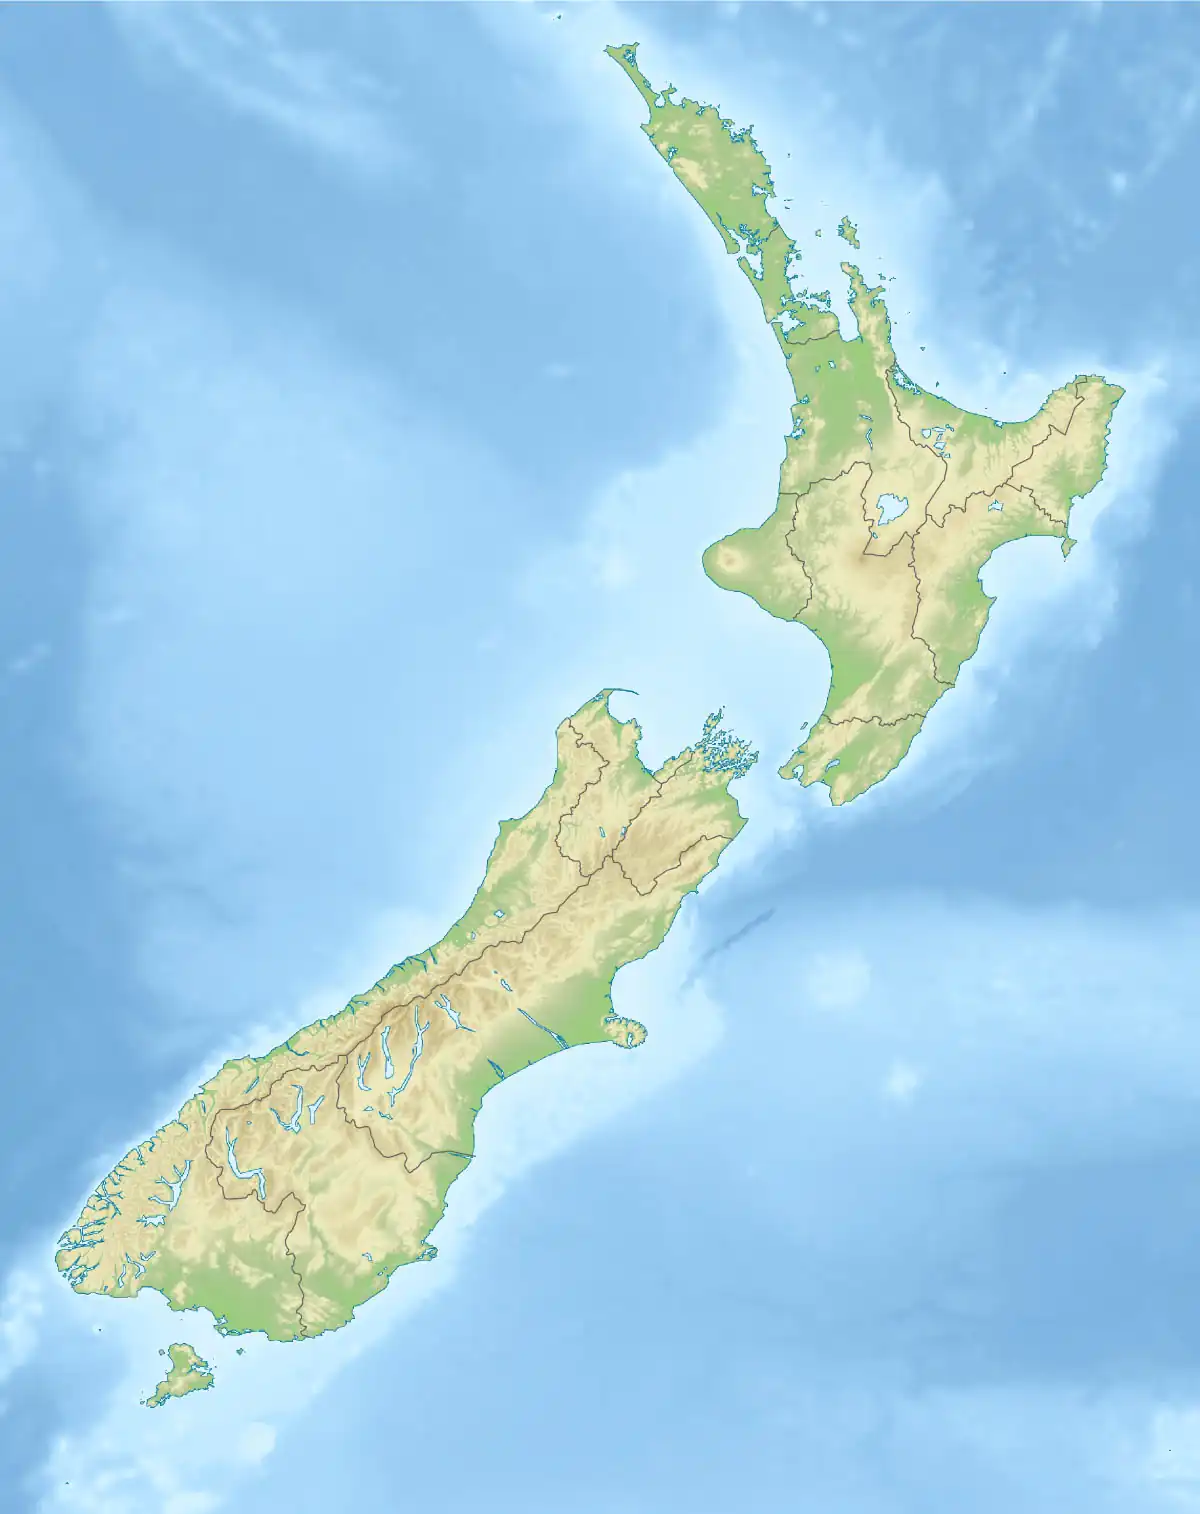 Pukeamoamo / Mitre is located in New Zealand